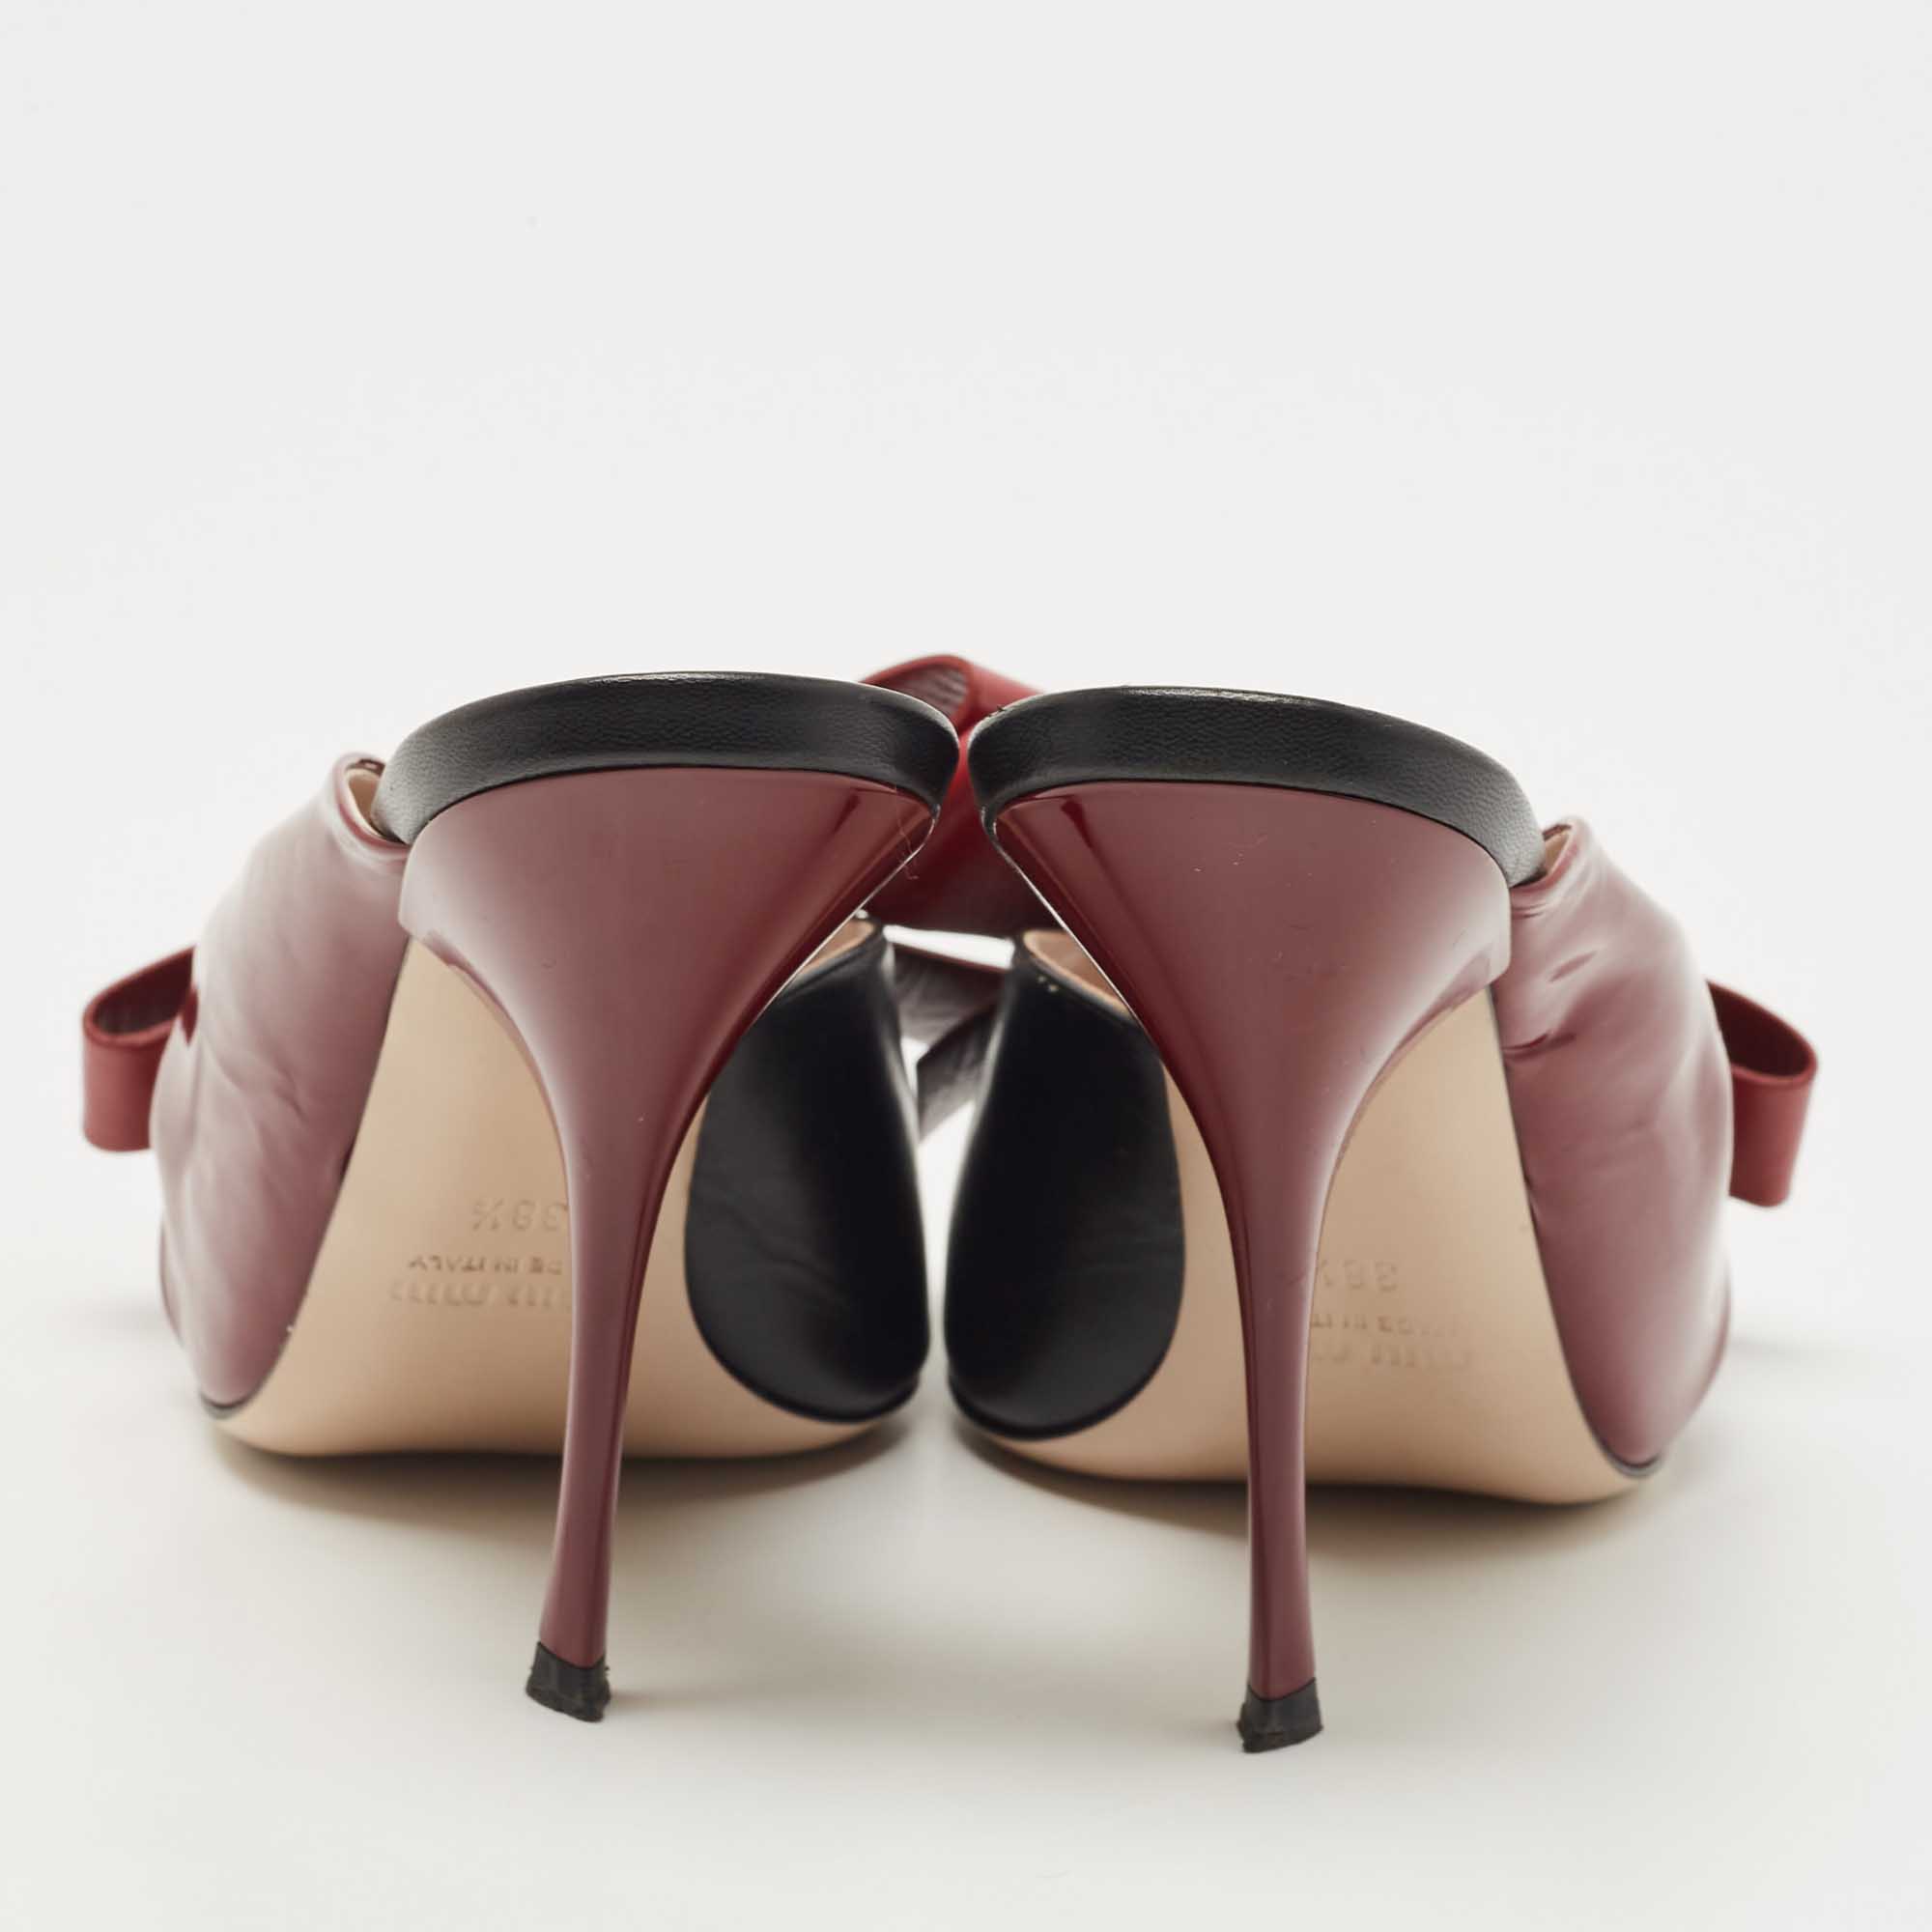 Miu Miu Burgundy/Black Pleated Patent And Leather Bow Slide Sandals Size 38.5